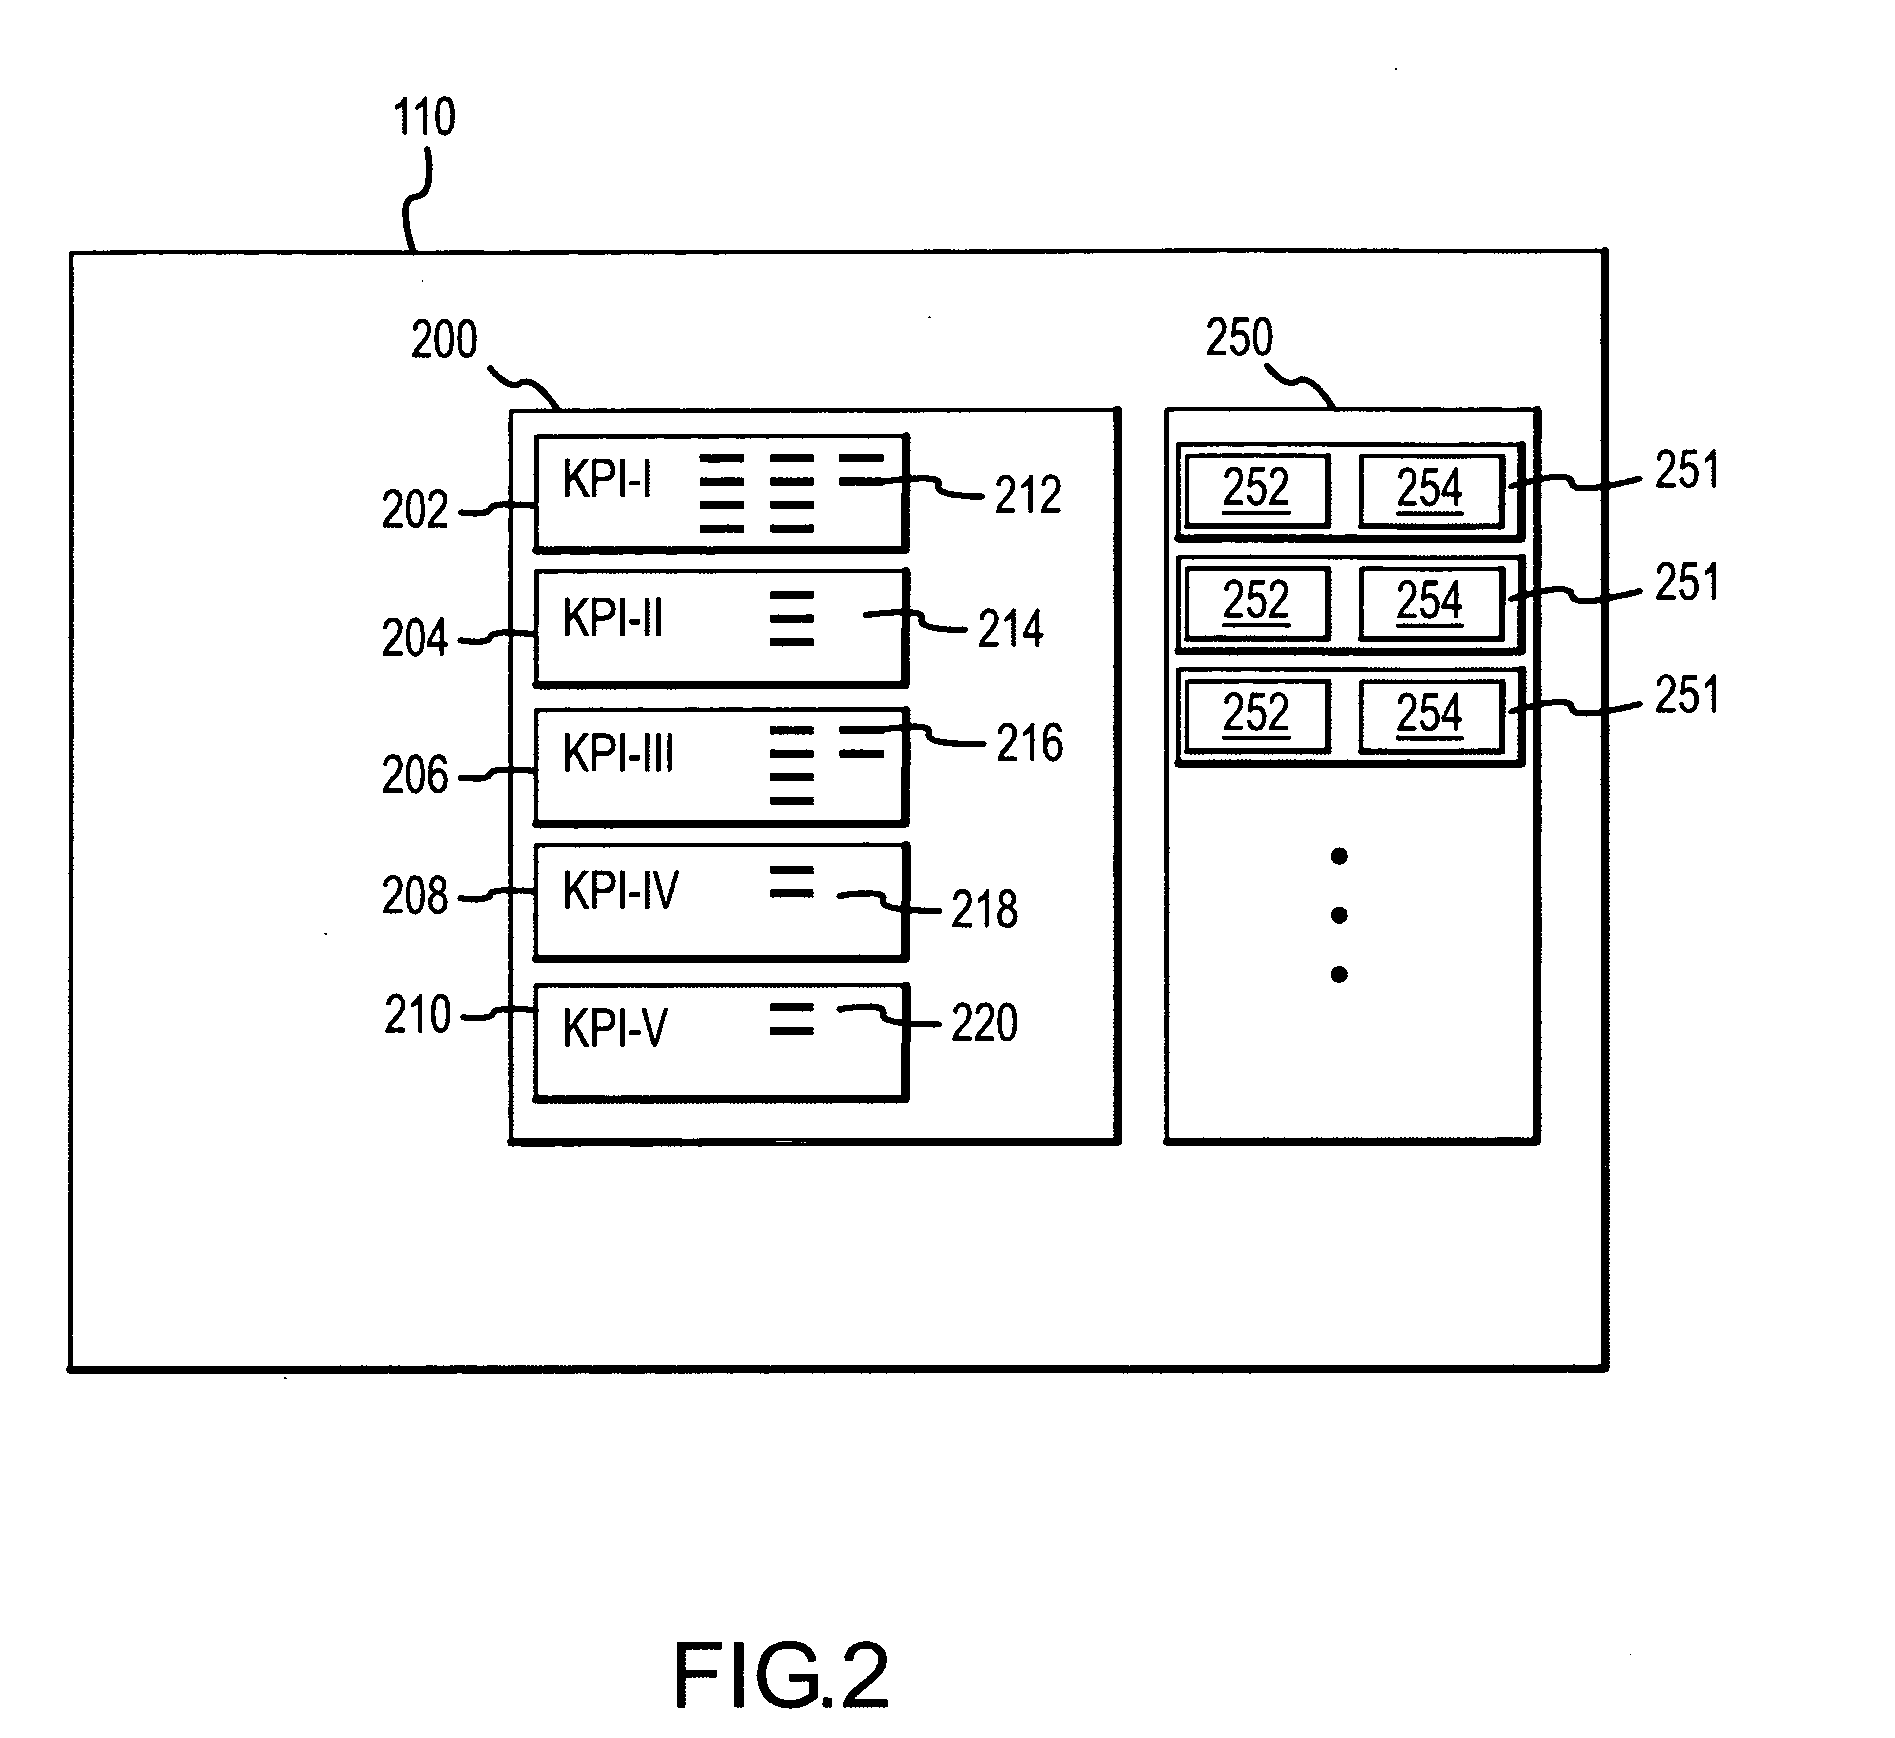 Methods and apparatus for defining, storing, and identifying key performance indicators associated with an RF network